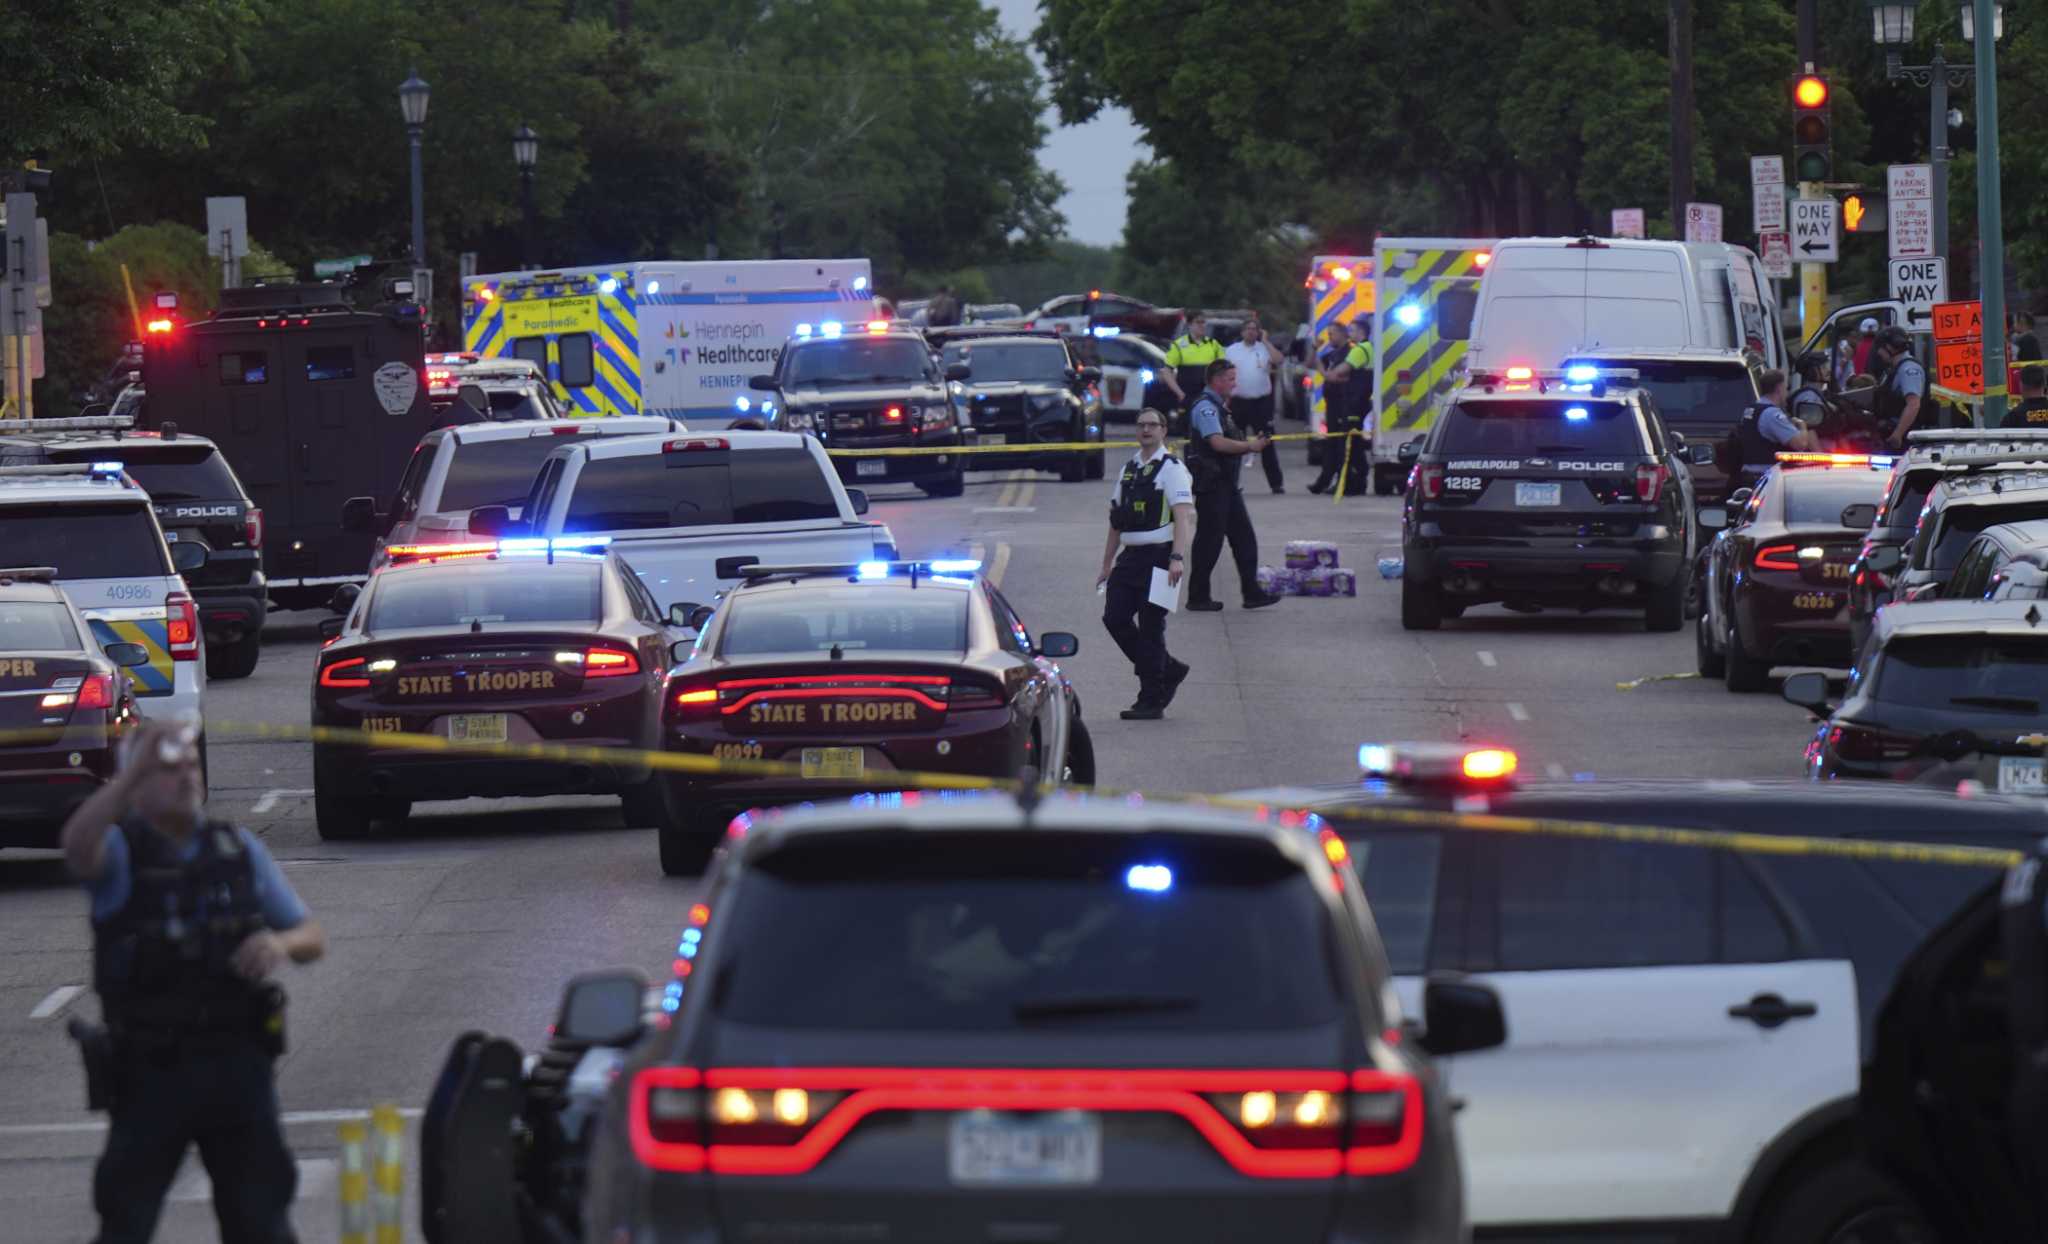 Minneapolis police officer has died in a mass shooting that killed 3 including suspected shooter